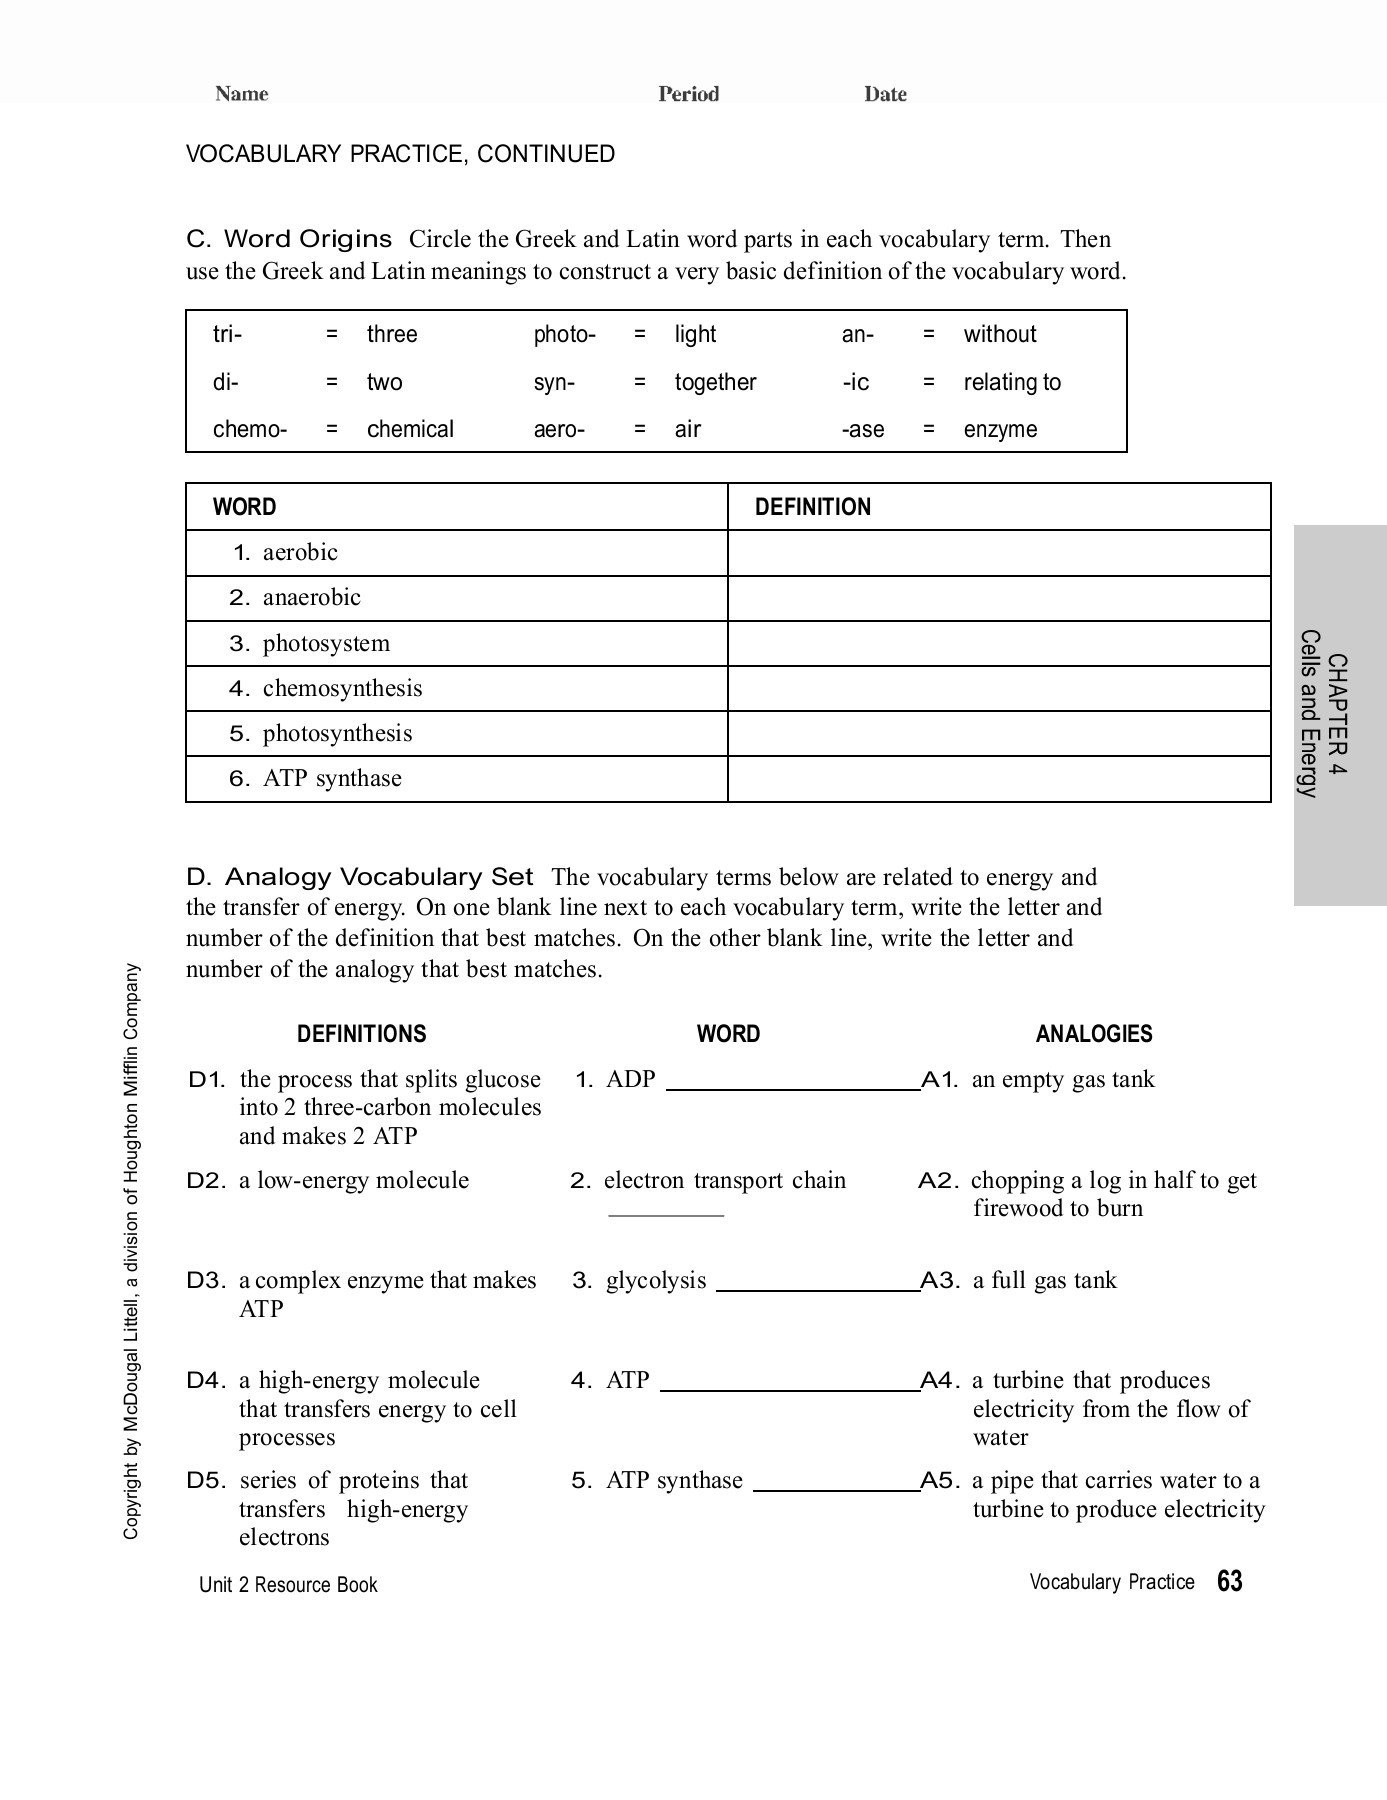 Chapter Cells And Energy 4 Vocabulary Practice Pages 1  3  Text Pertaining To Chapter 4 Cells And Energy Vocabulary Practice Worksheet Answer Key